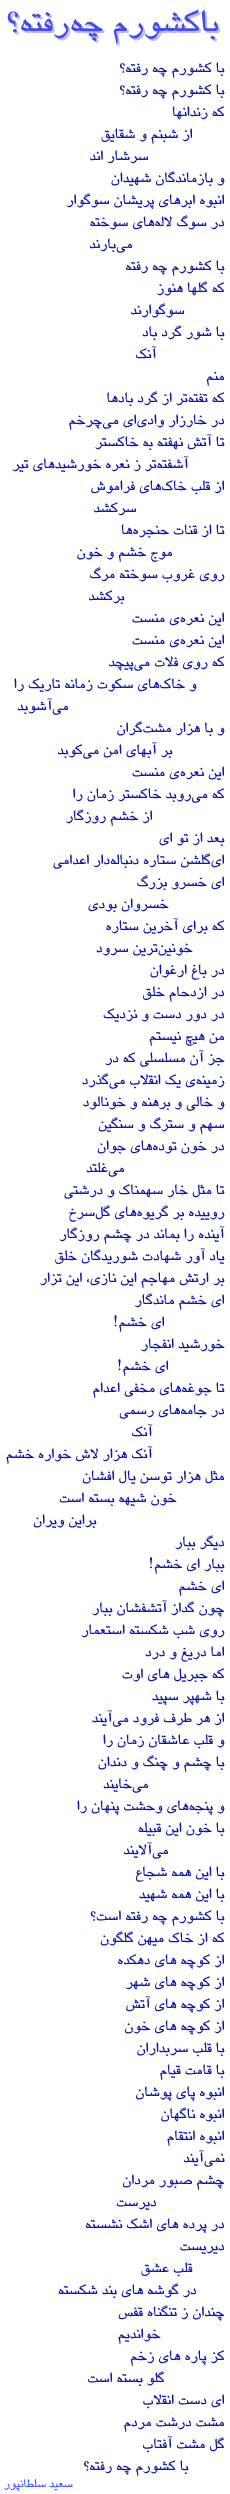 Poem by Saeed Sultanpur